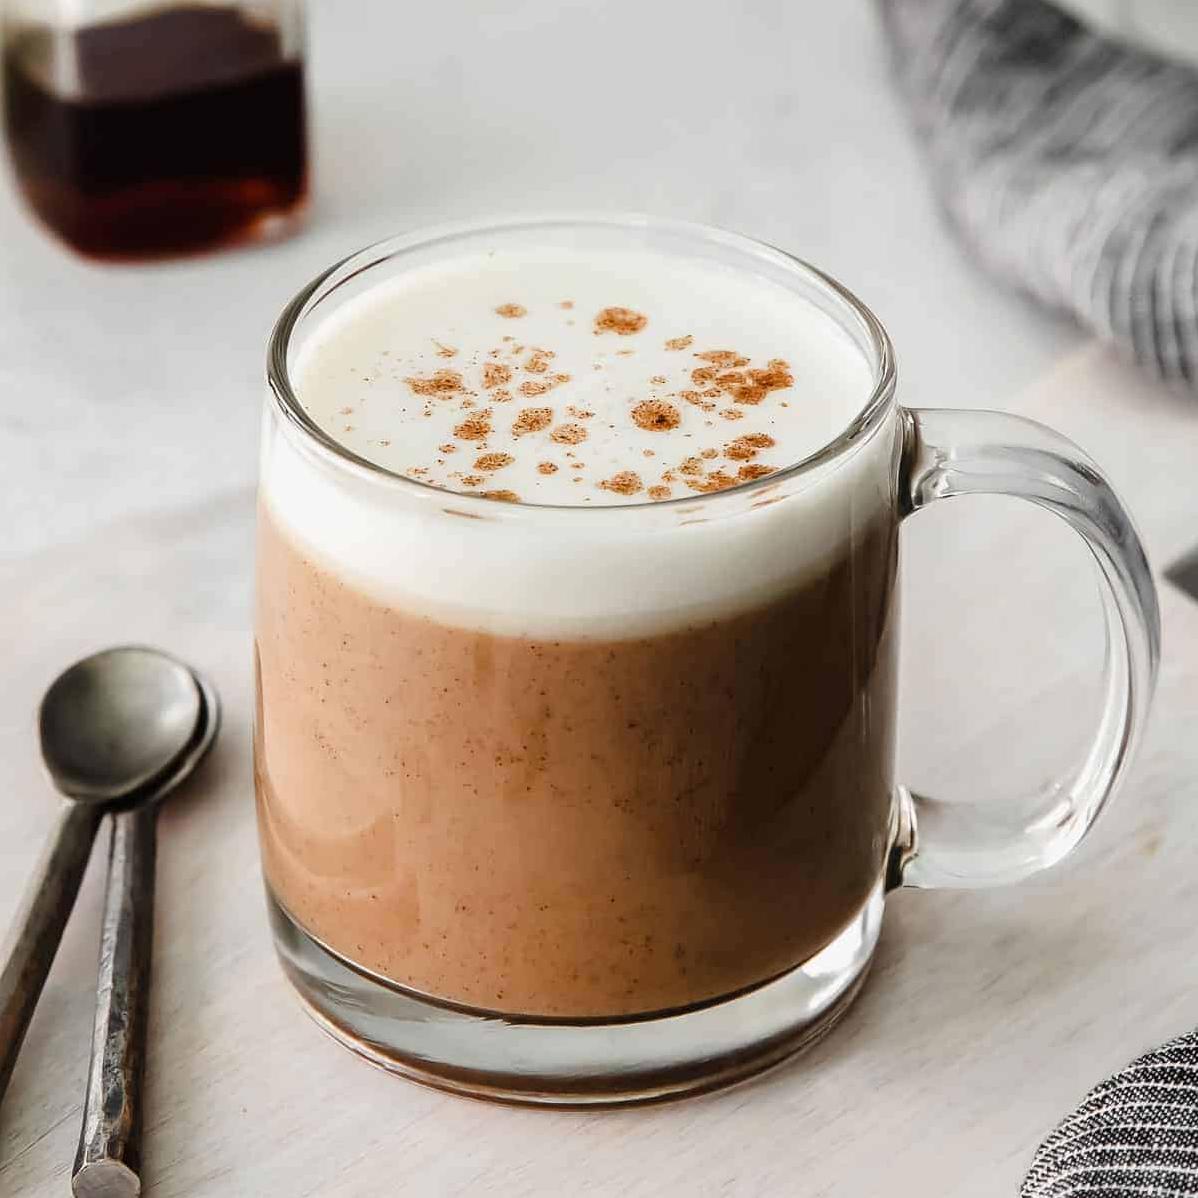  Let's spice things up! Try our homemade Chai Tea Latte today. 🌶️🍵